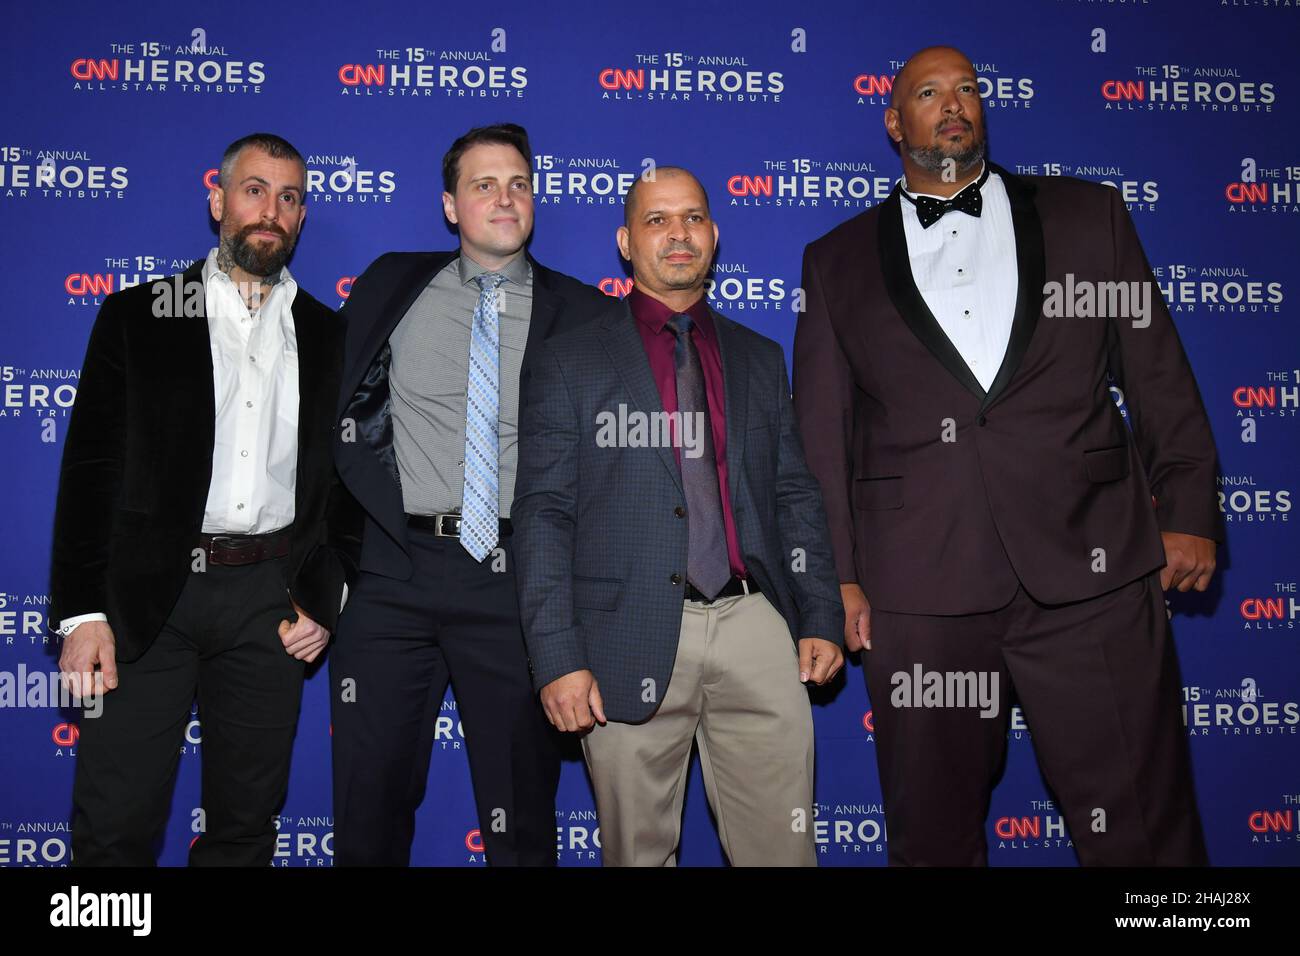 Officer Michael Fanone, Officer Daniel Hodges, Sgt. Aquilino Gonell, Officer Harry Dunn attend The 15th Annual CNN Heroes: All-Star Tribute at Americ Stock Photo